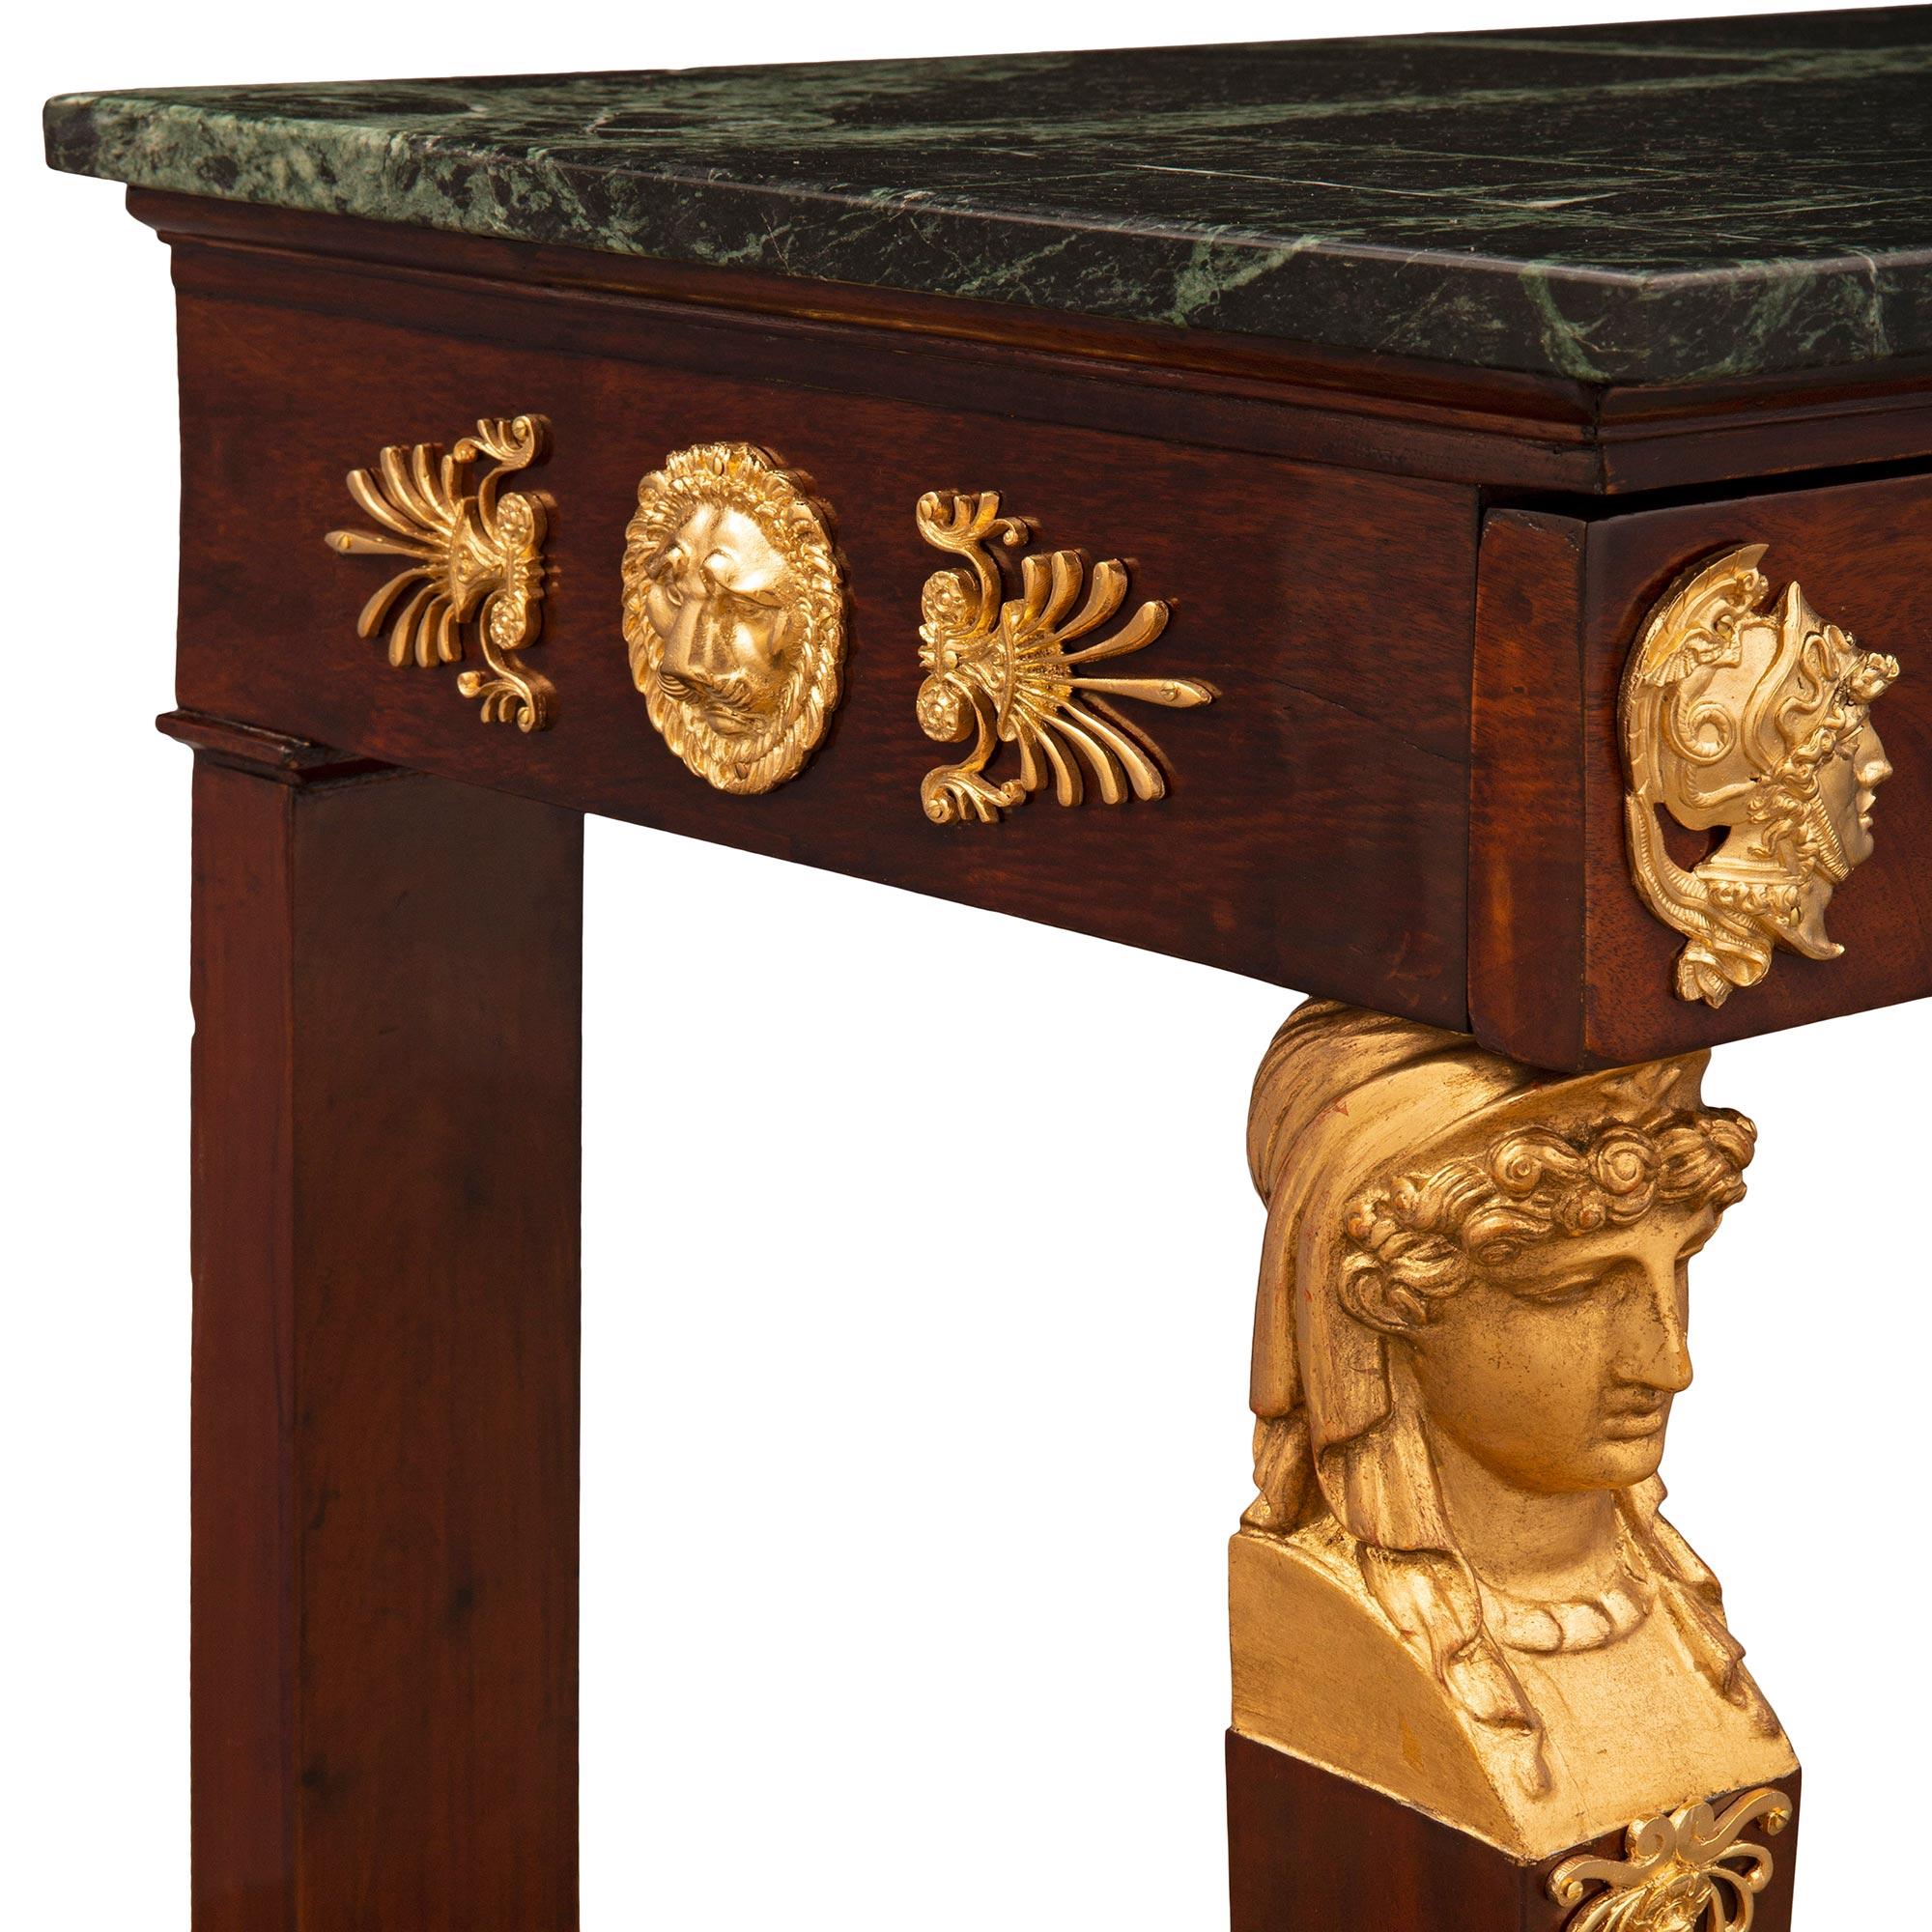 French 19th Century 1st Empire Period Mahogany, Ormolu, and Marble Console For Sale 3